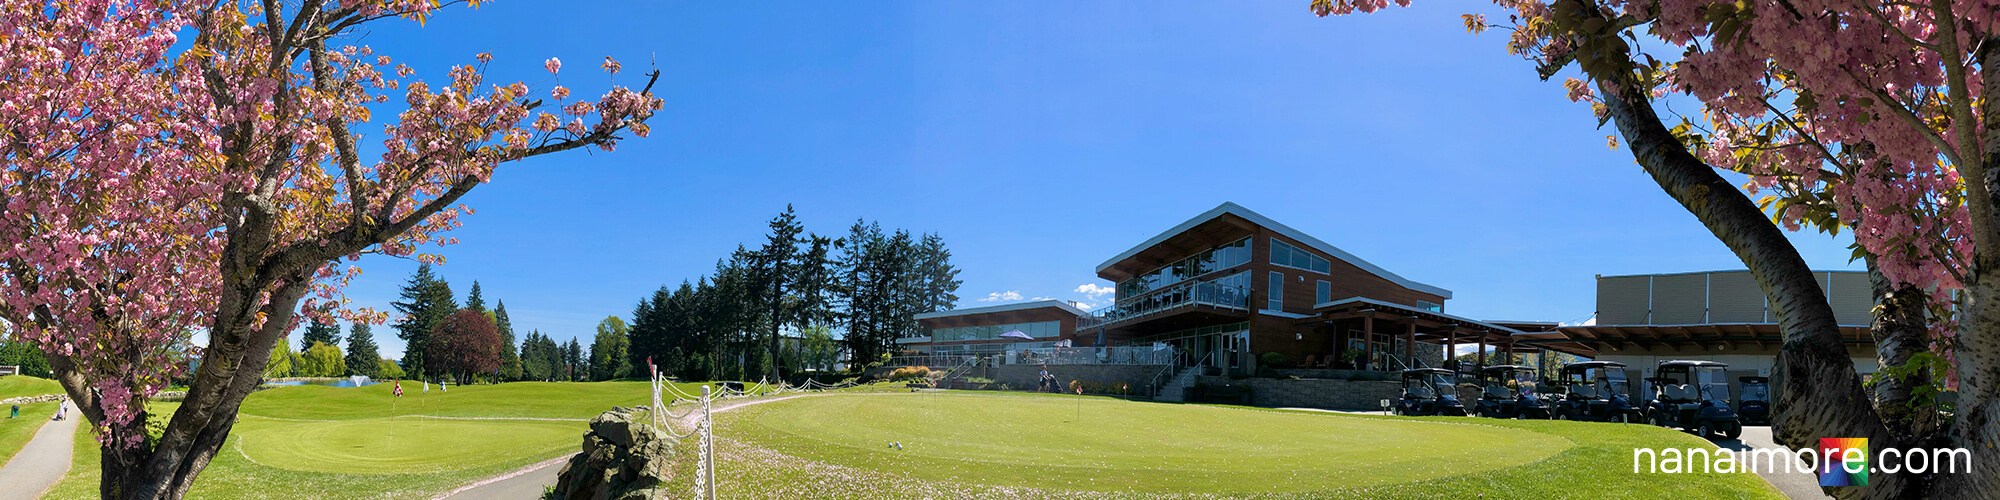 Carry blossom trees at putting greens on Nanaimo Golf Course